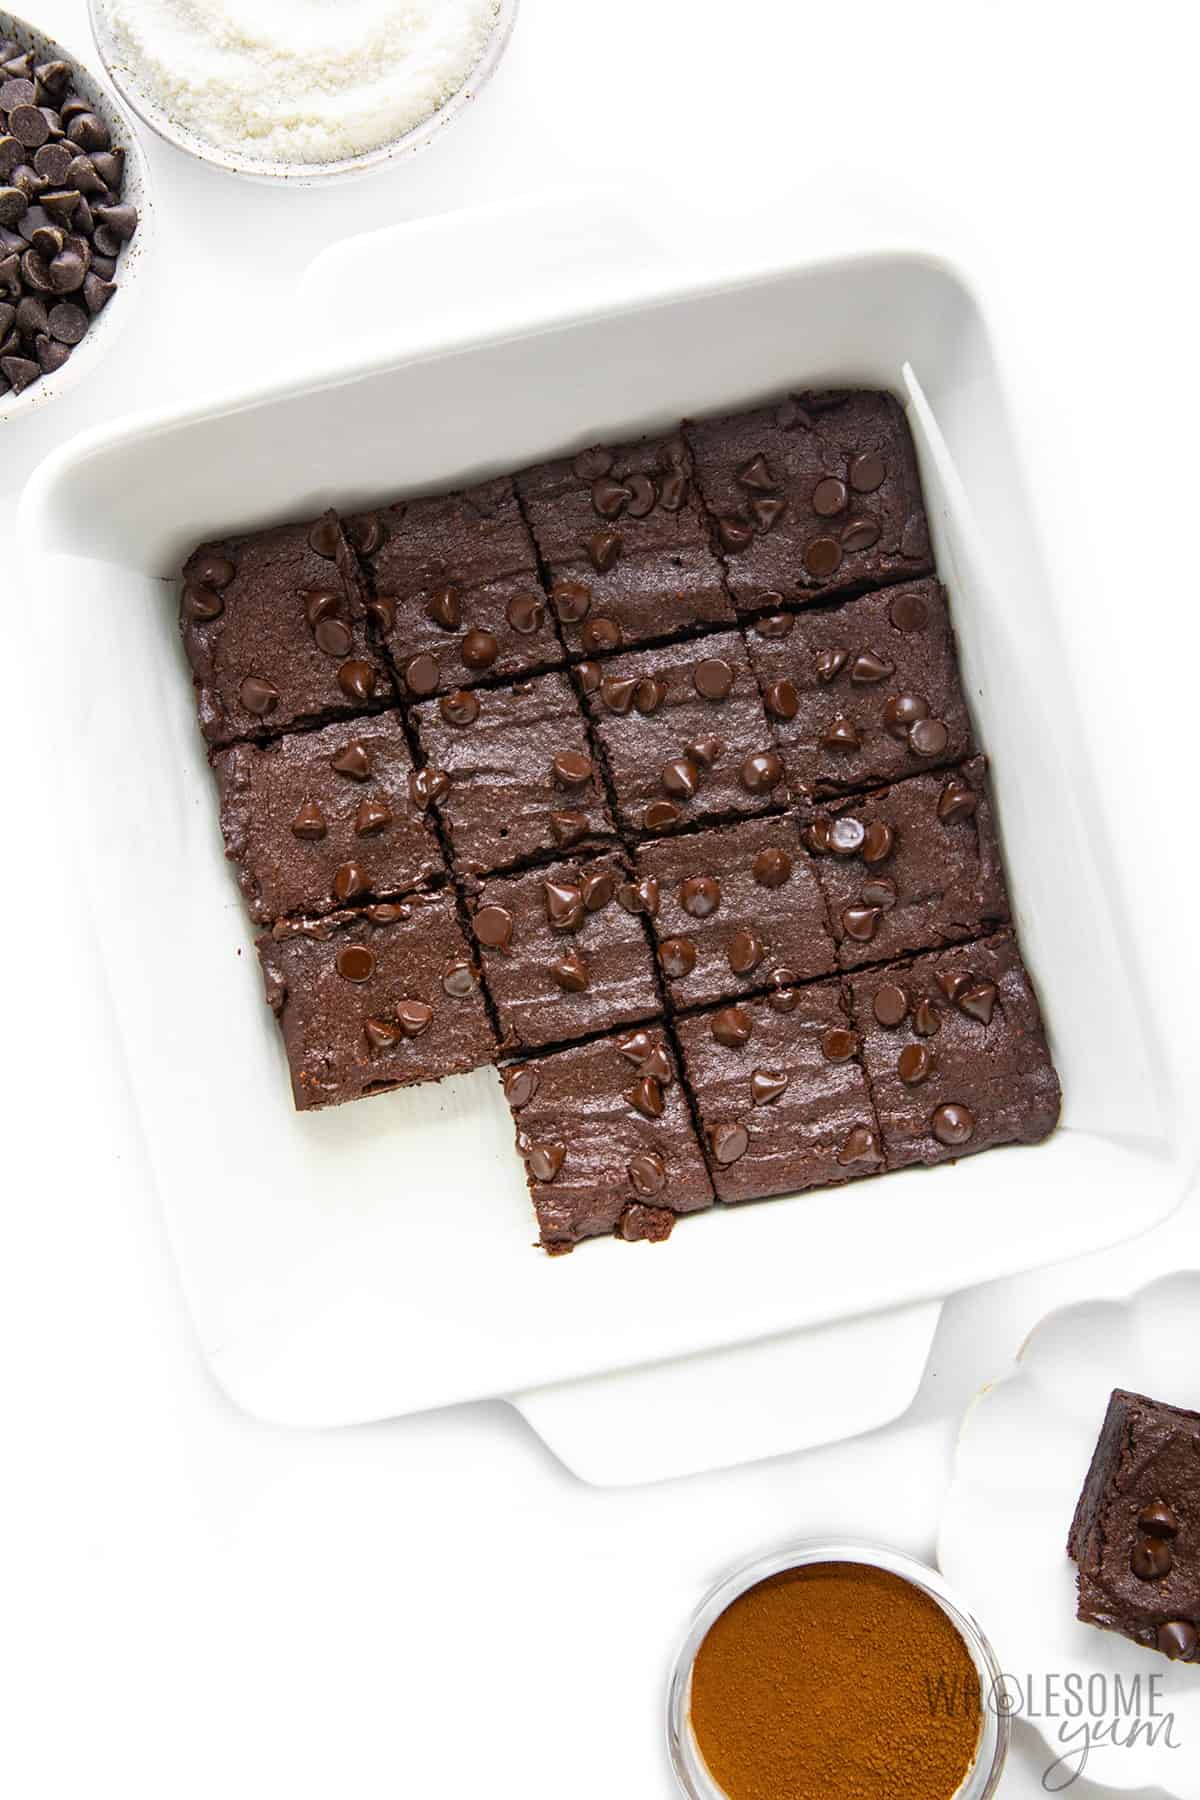 Cooled coconut flour brownies in a baking dish